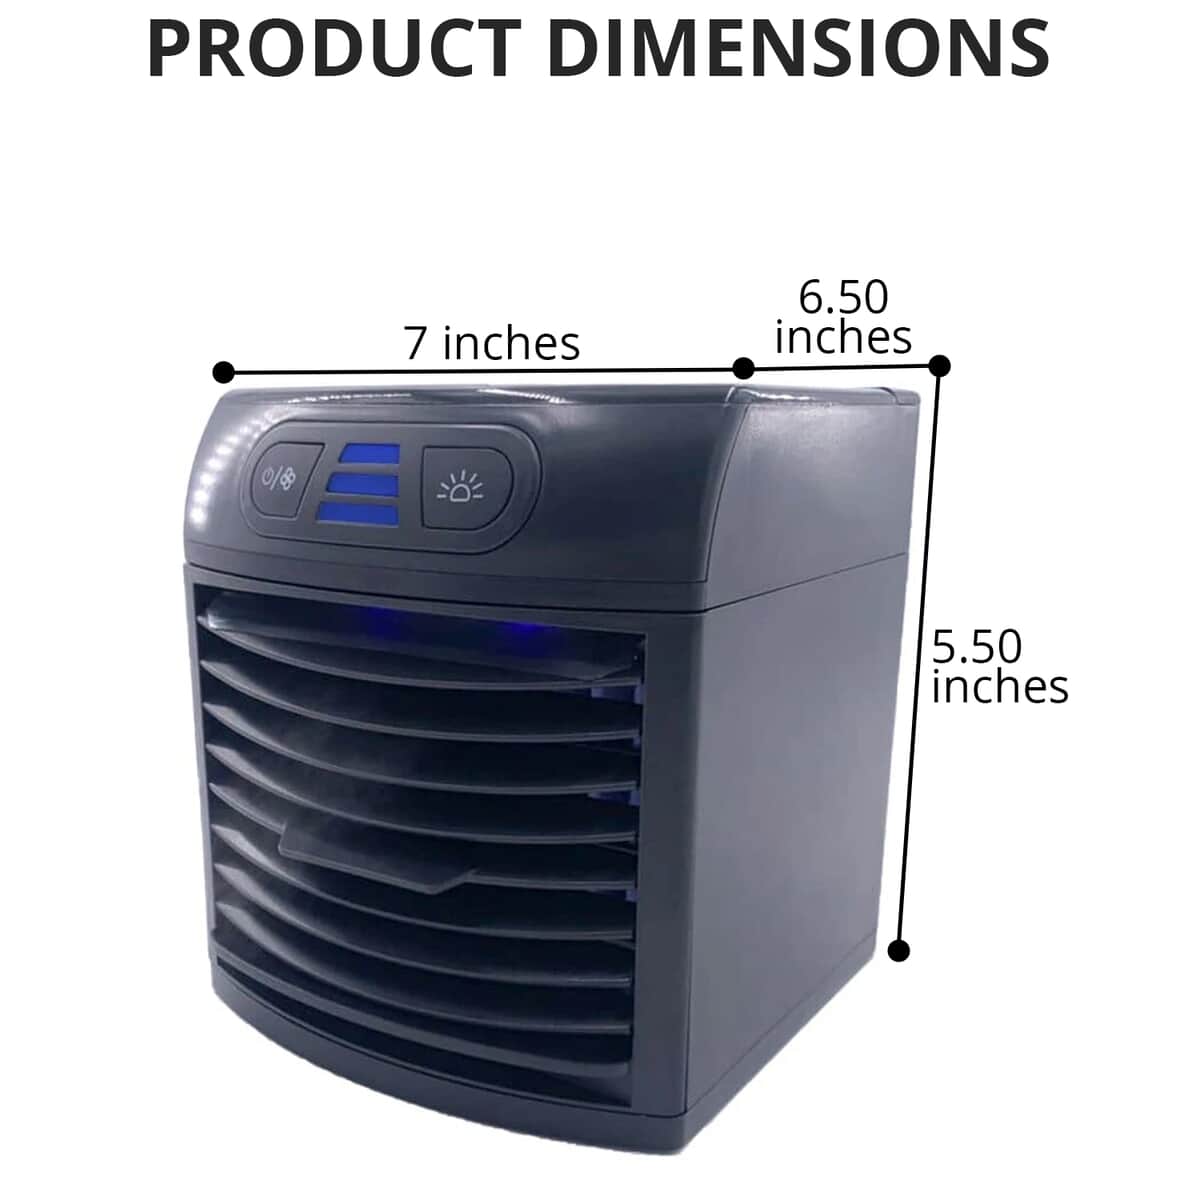 HYDRO-ICE-Portable 8 IN 1 Air Cooling and Humidifer System image number 4